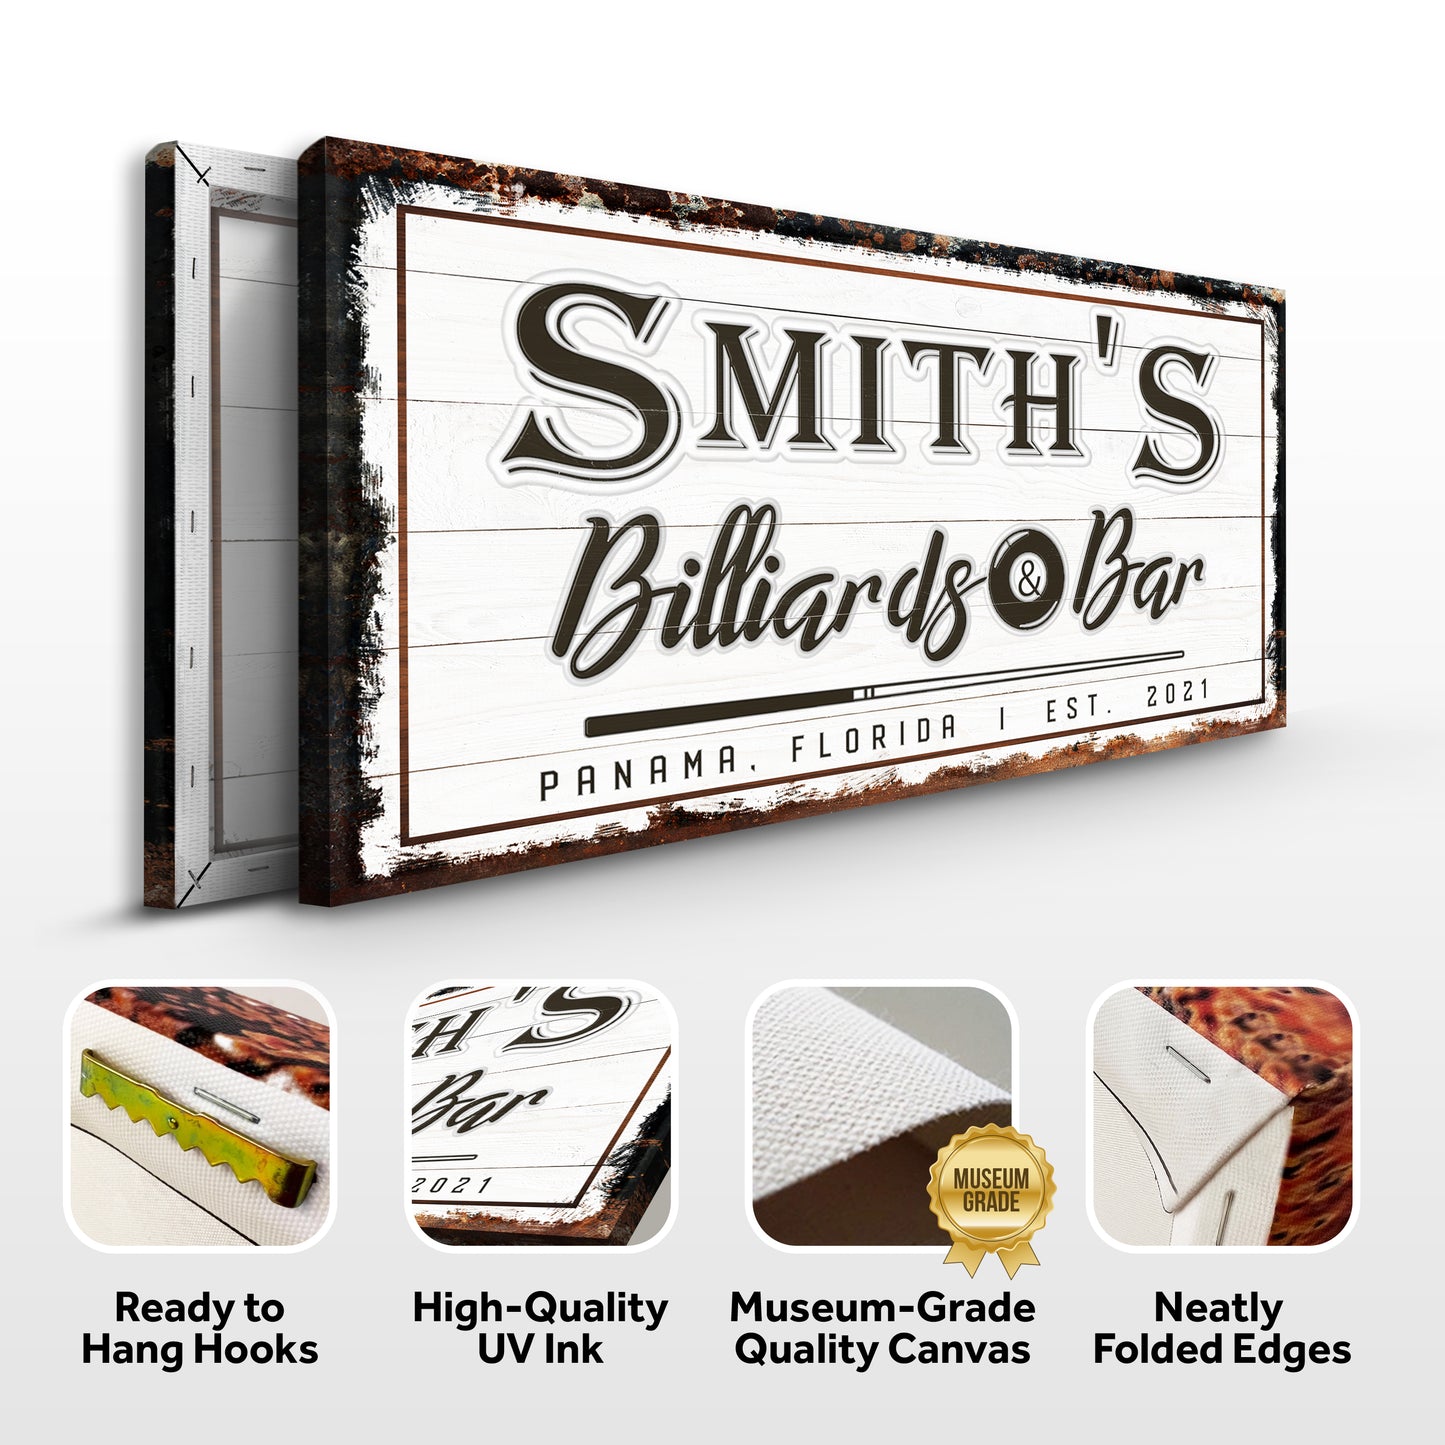 Billiards And Bar Sign (Free Shipping)